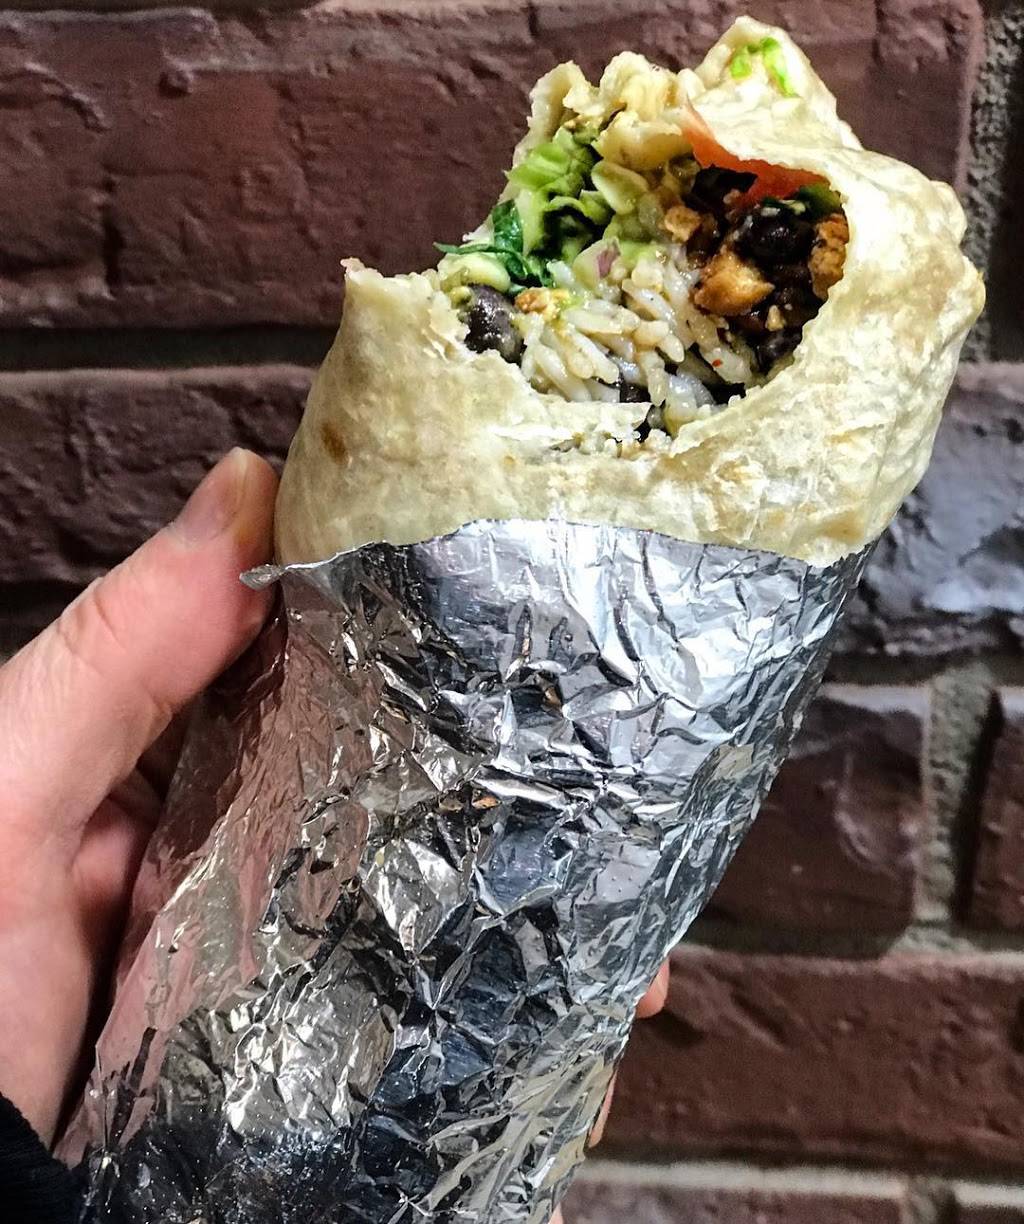 Chipotle Mexican Grill | restaurant | 805 Columbus Ave, New York, NY 10025, USA | 2122227389 OR +1 212-222-7389